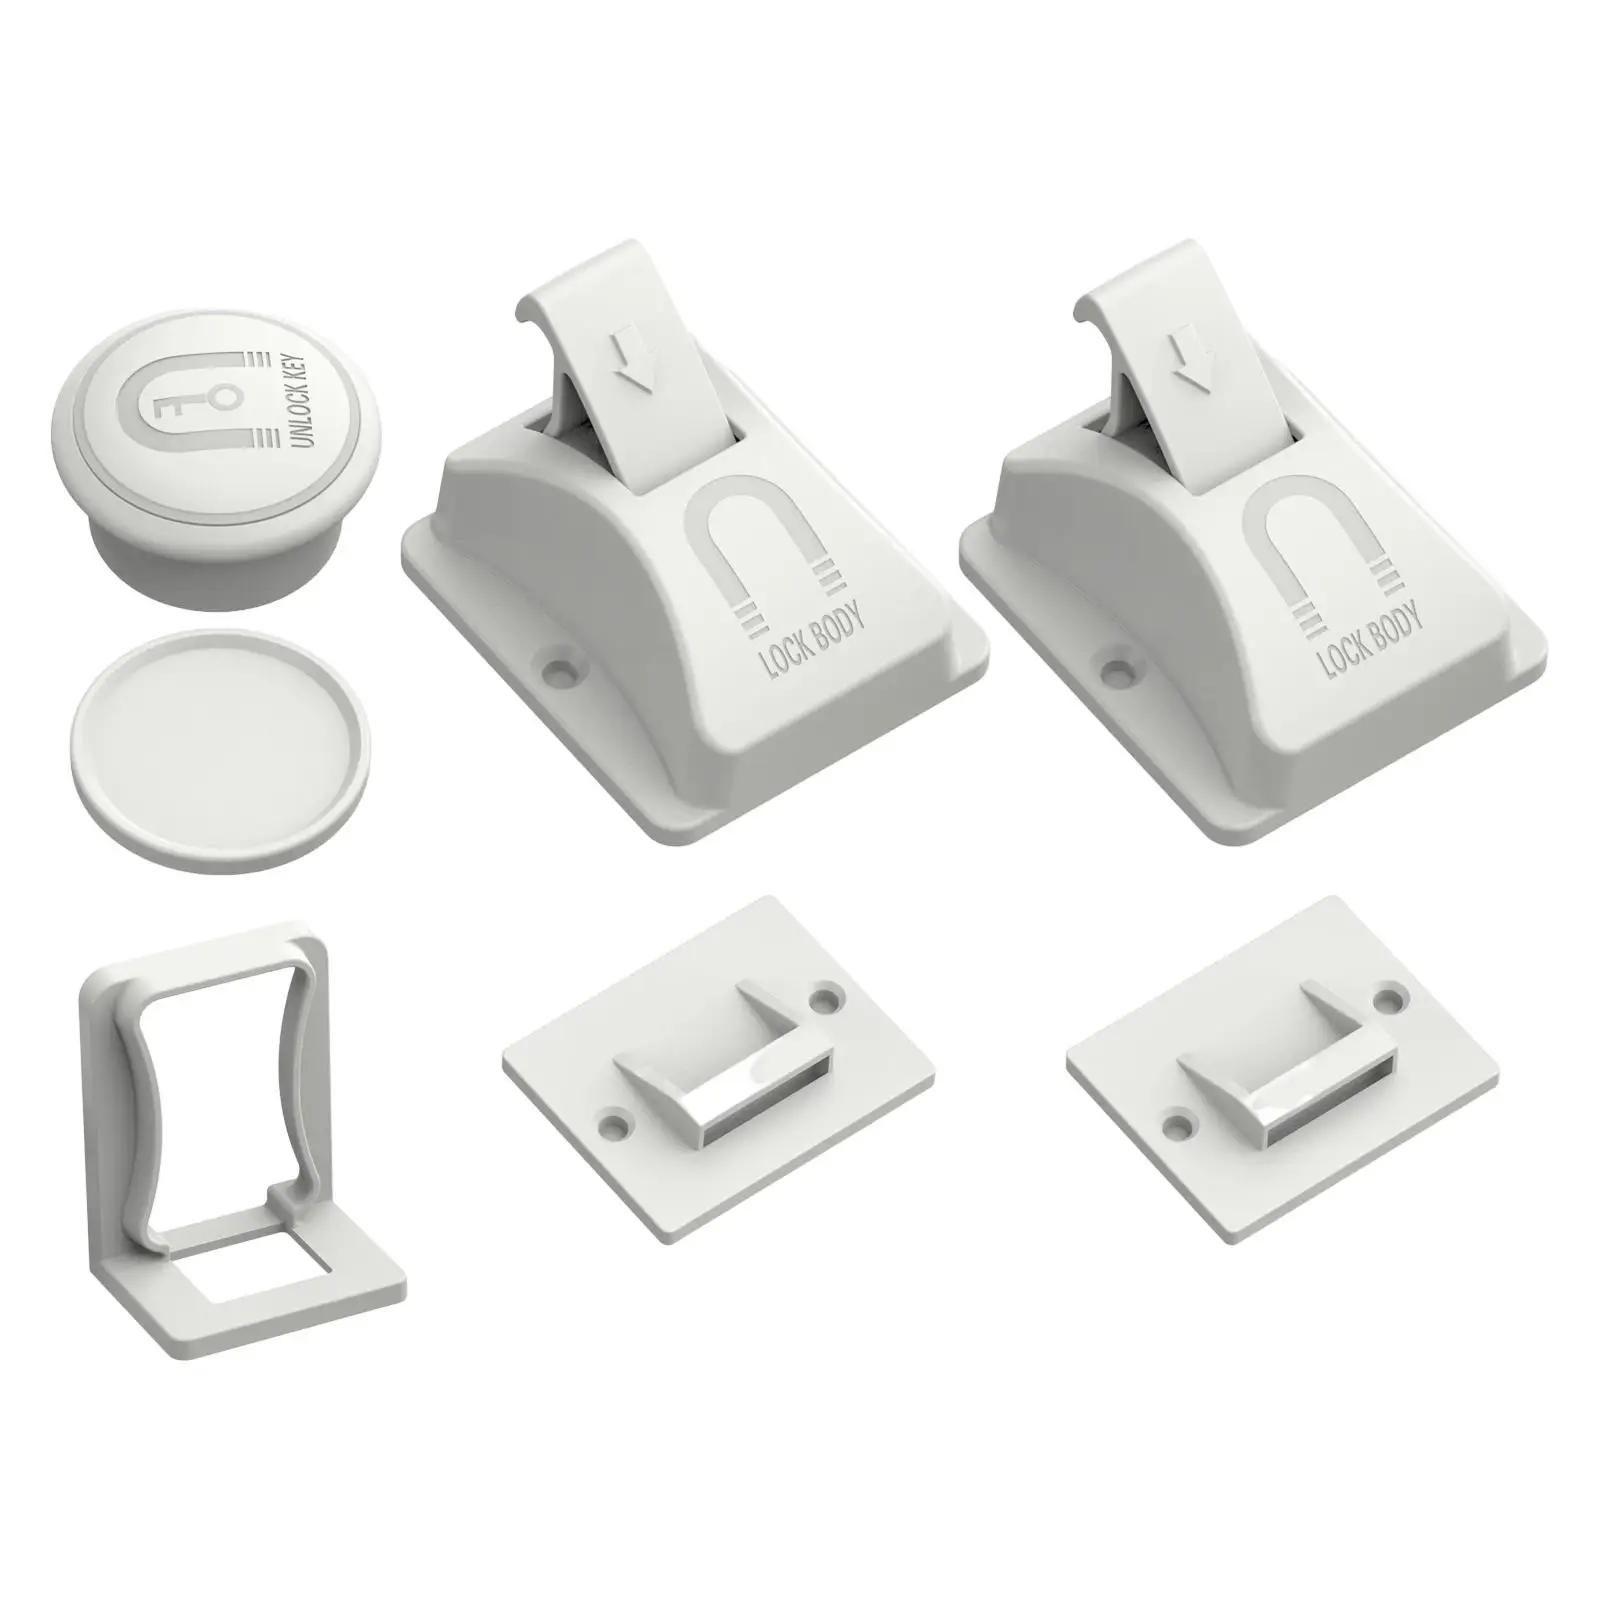 Child Locks for Cabinets Drawers 2 Pack and 1 Key Multipurpose Adhesive Child